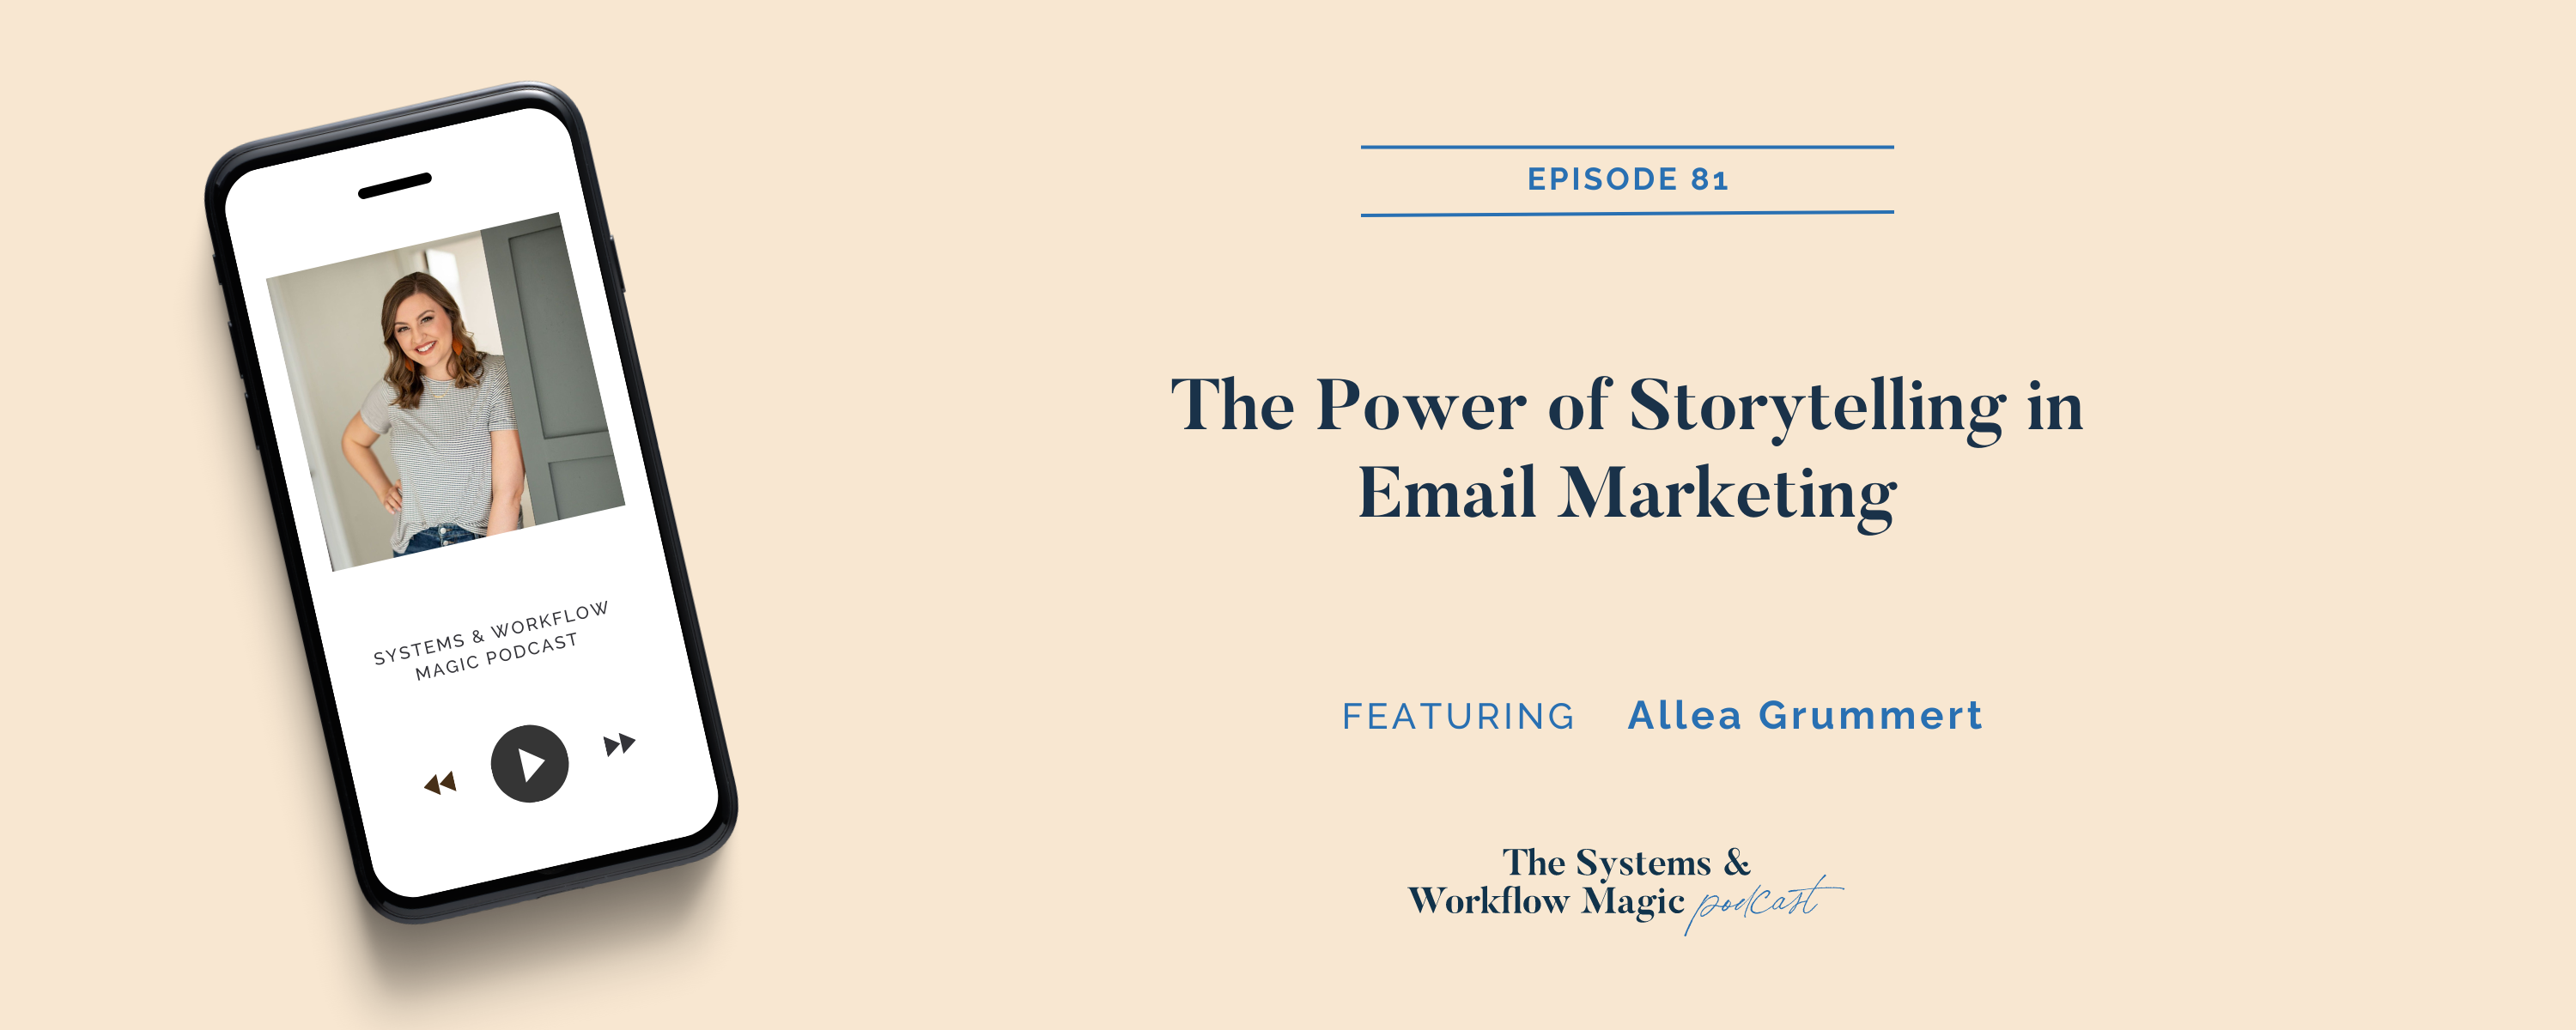 81: The Power of Storytelling in Email Marketing featuring Allea Grummert